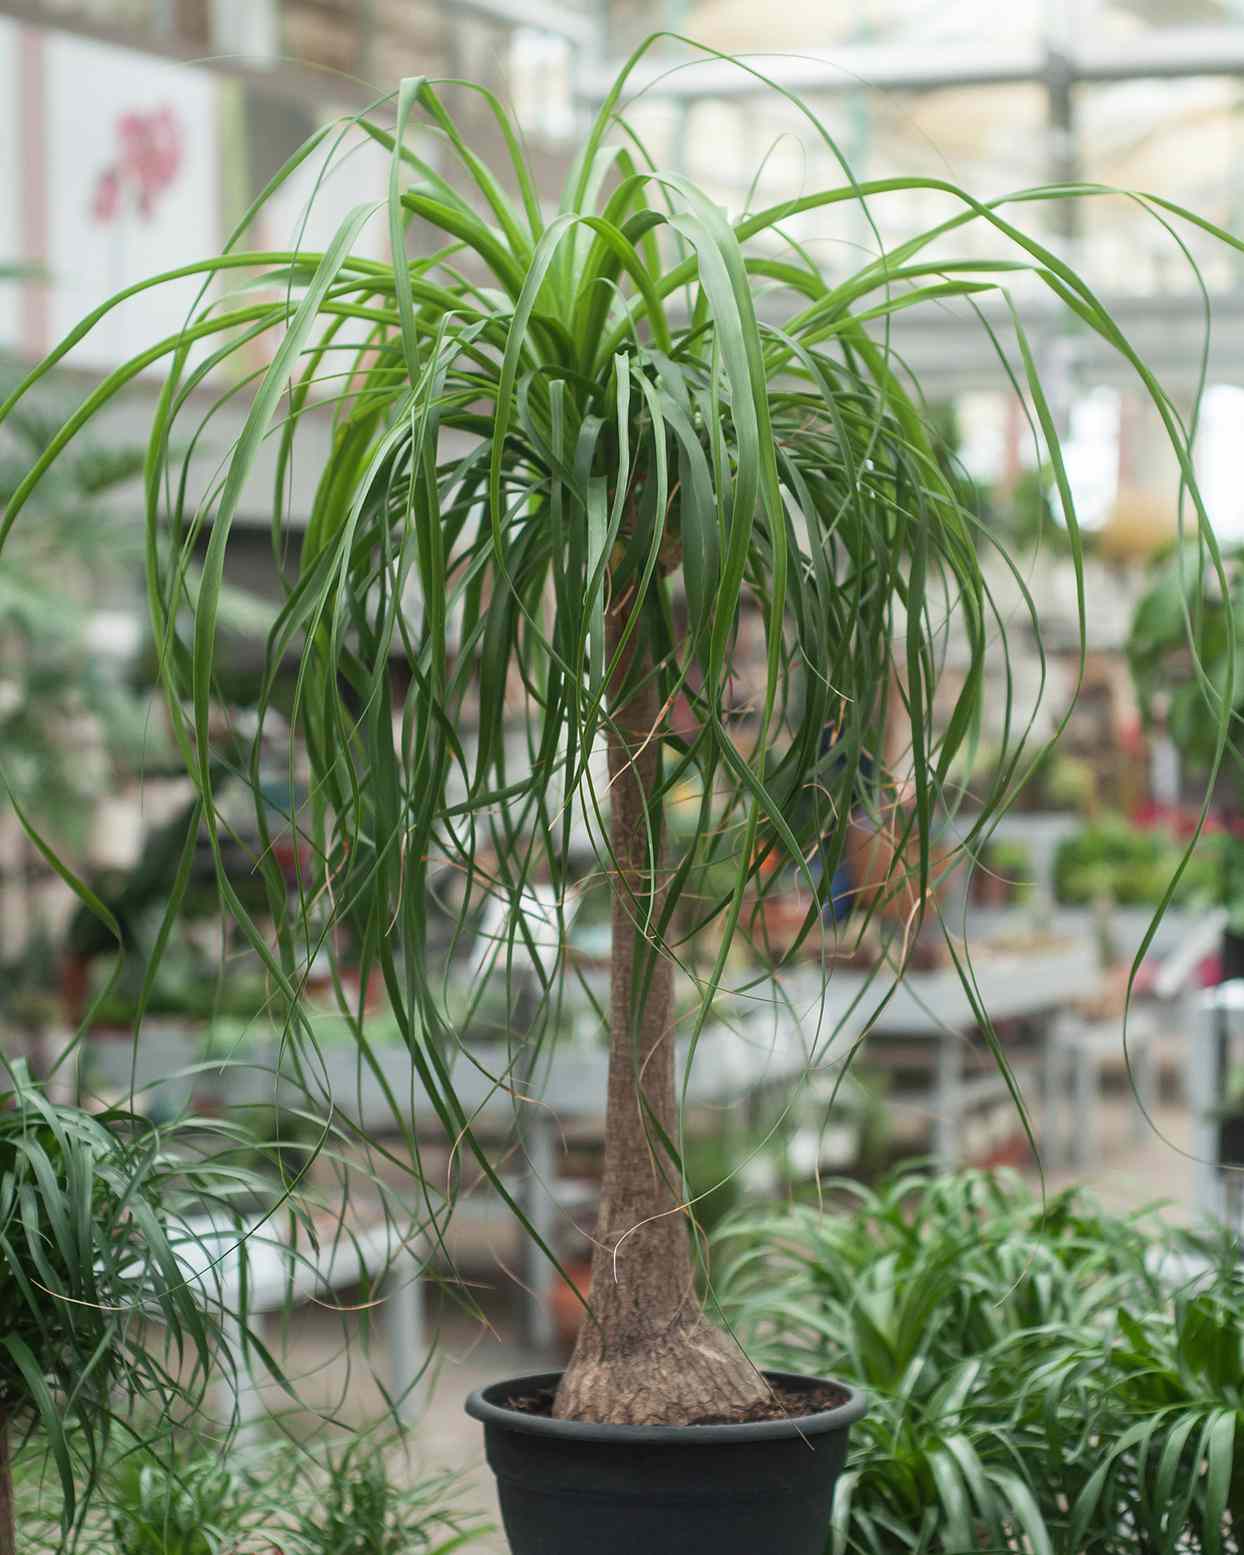 Ponytail Palm among other plants